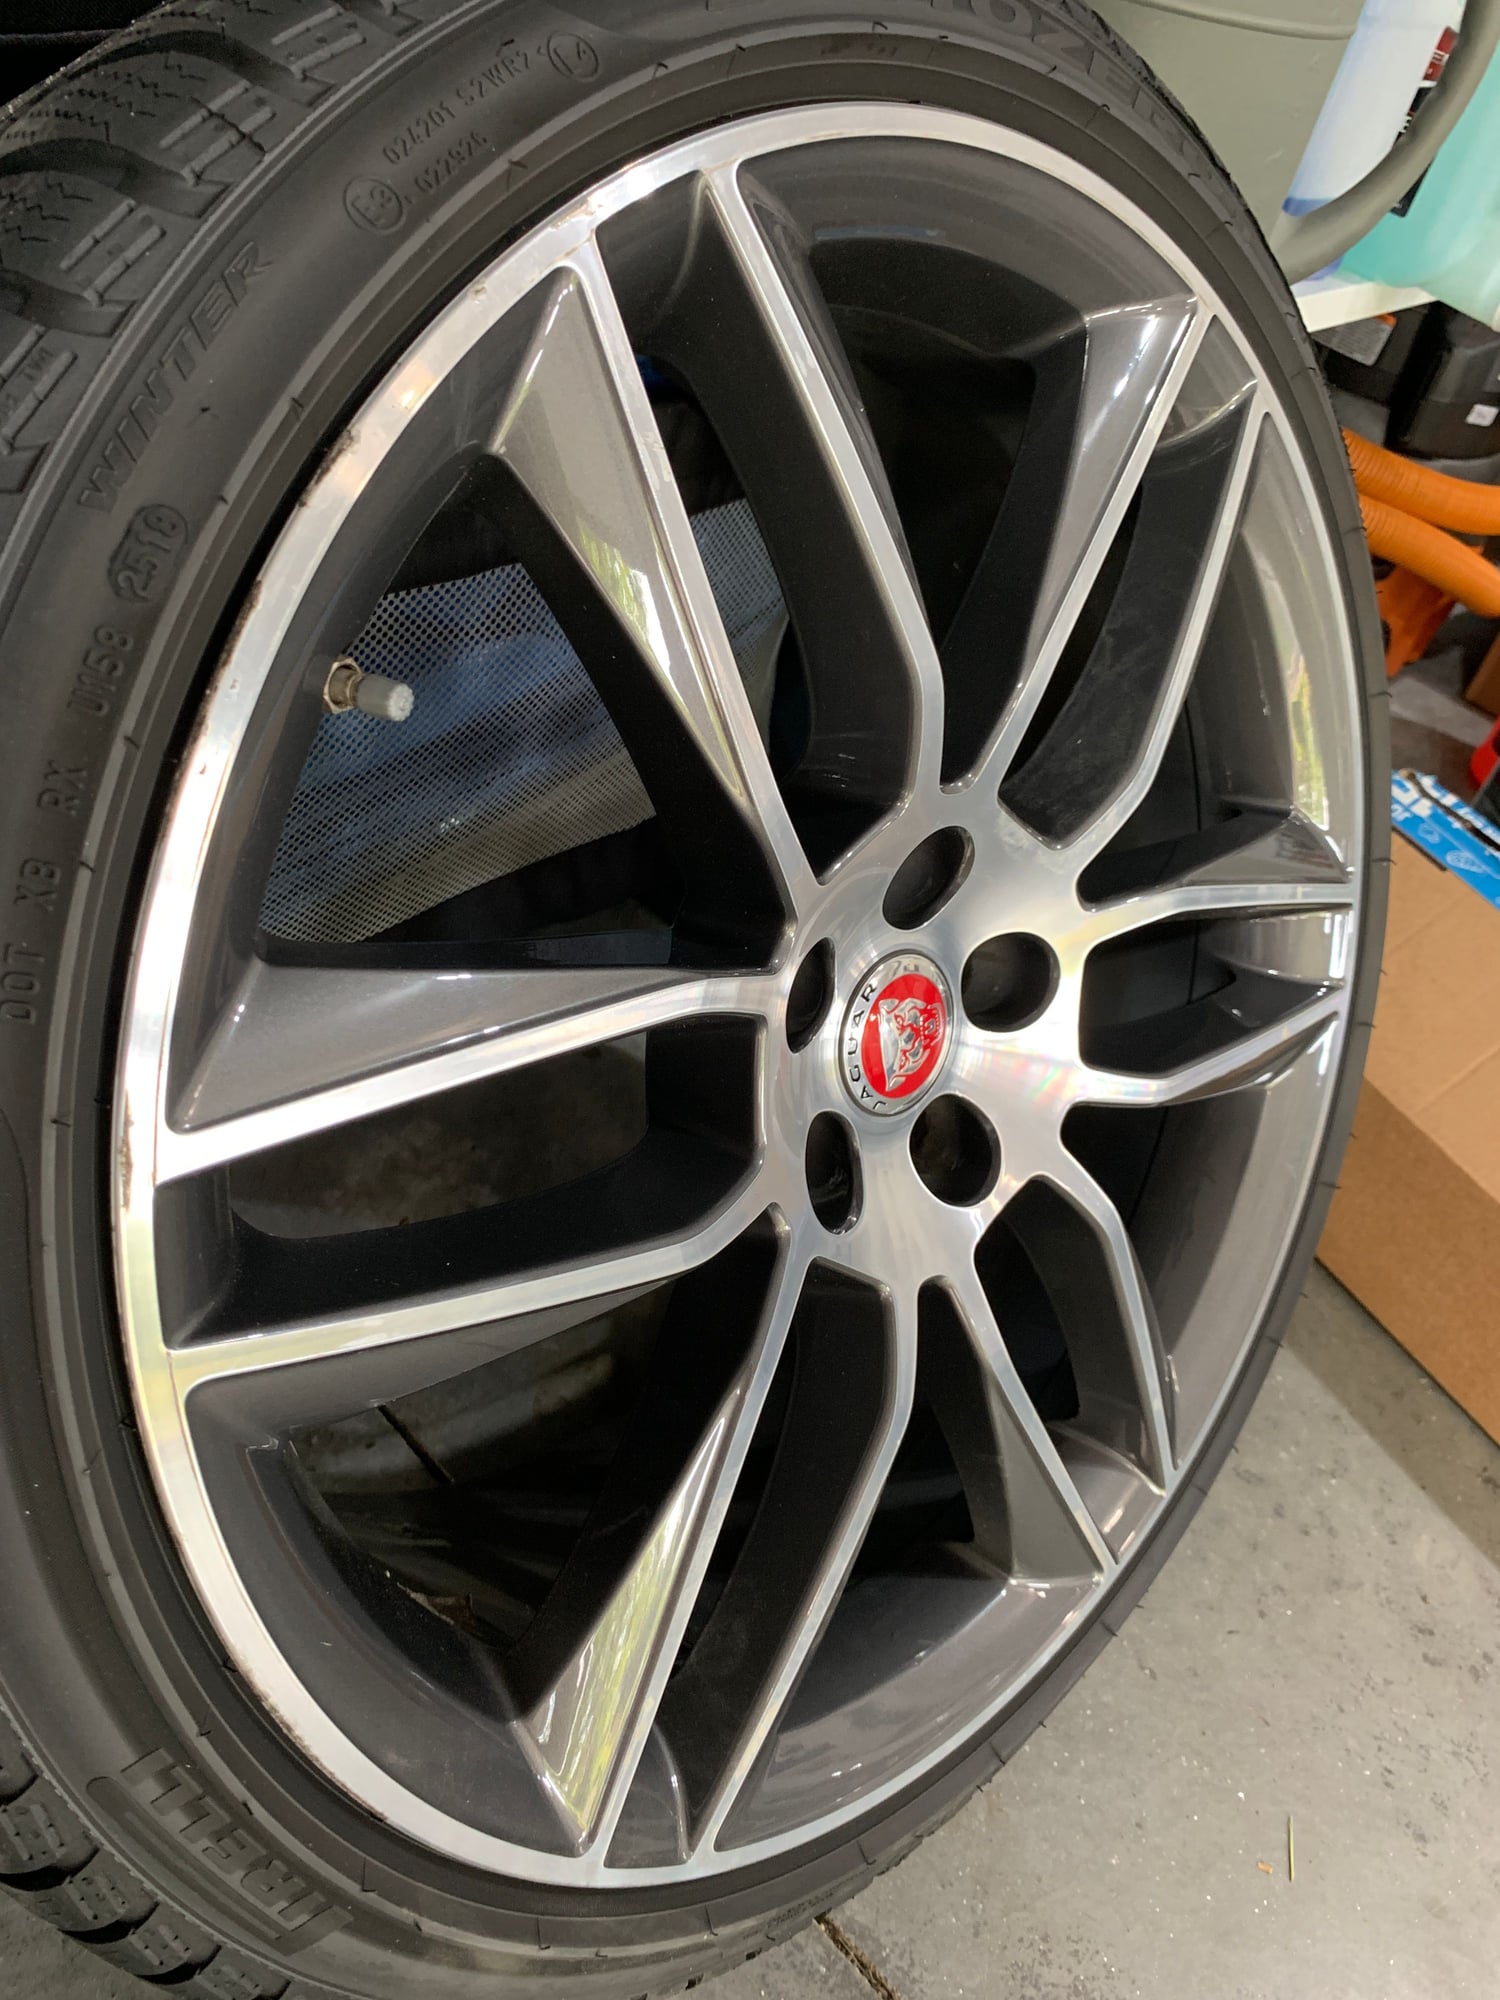 Wheels and Tires/Axles - F-Type R OEM 20" Staggered Wheels with Pirelli Winter Sottozero 3 Snow Tires w/ TPMS - Used - All Years Jaguar F-Type - Falmouth, ME 04105, United States